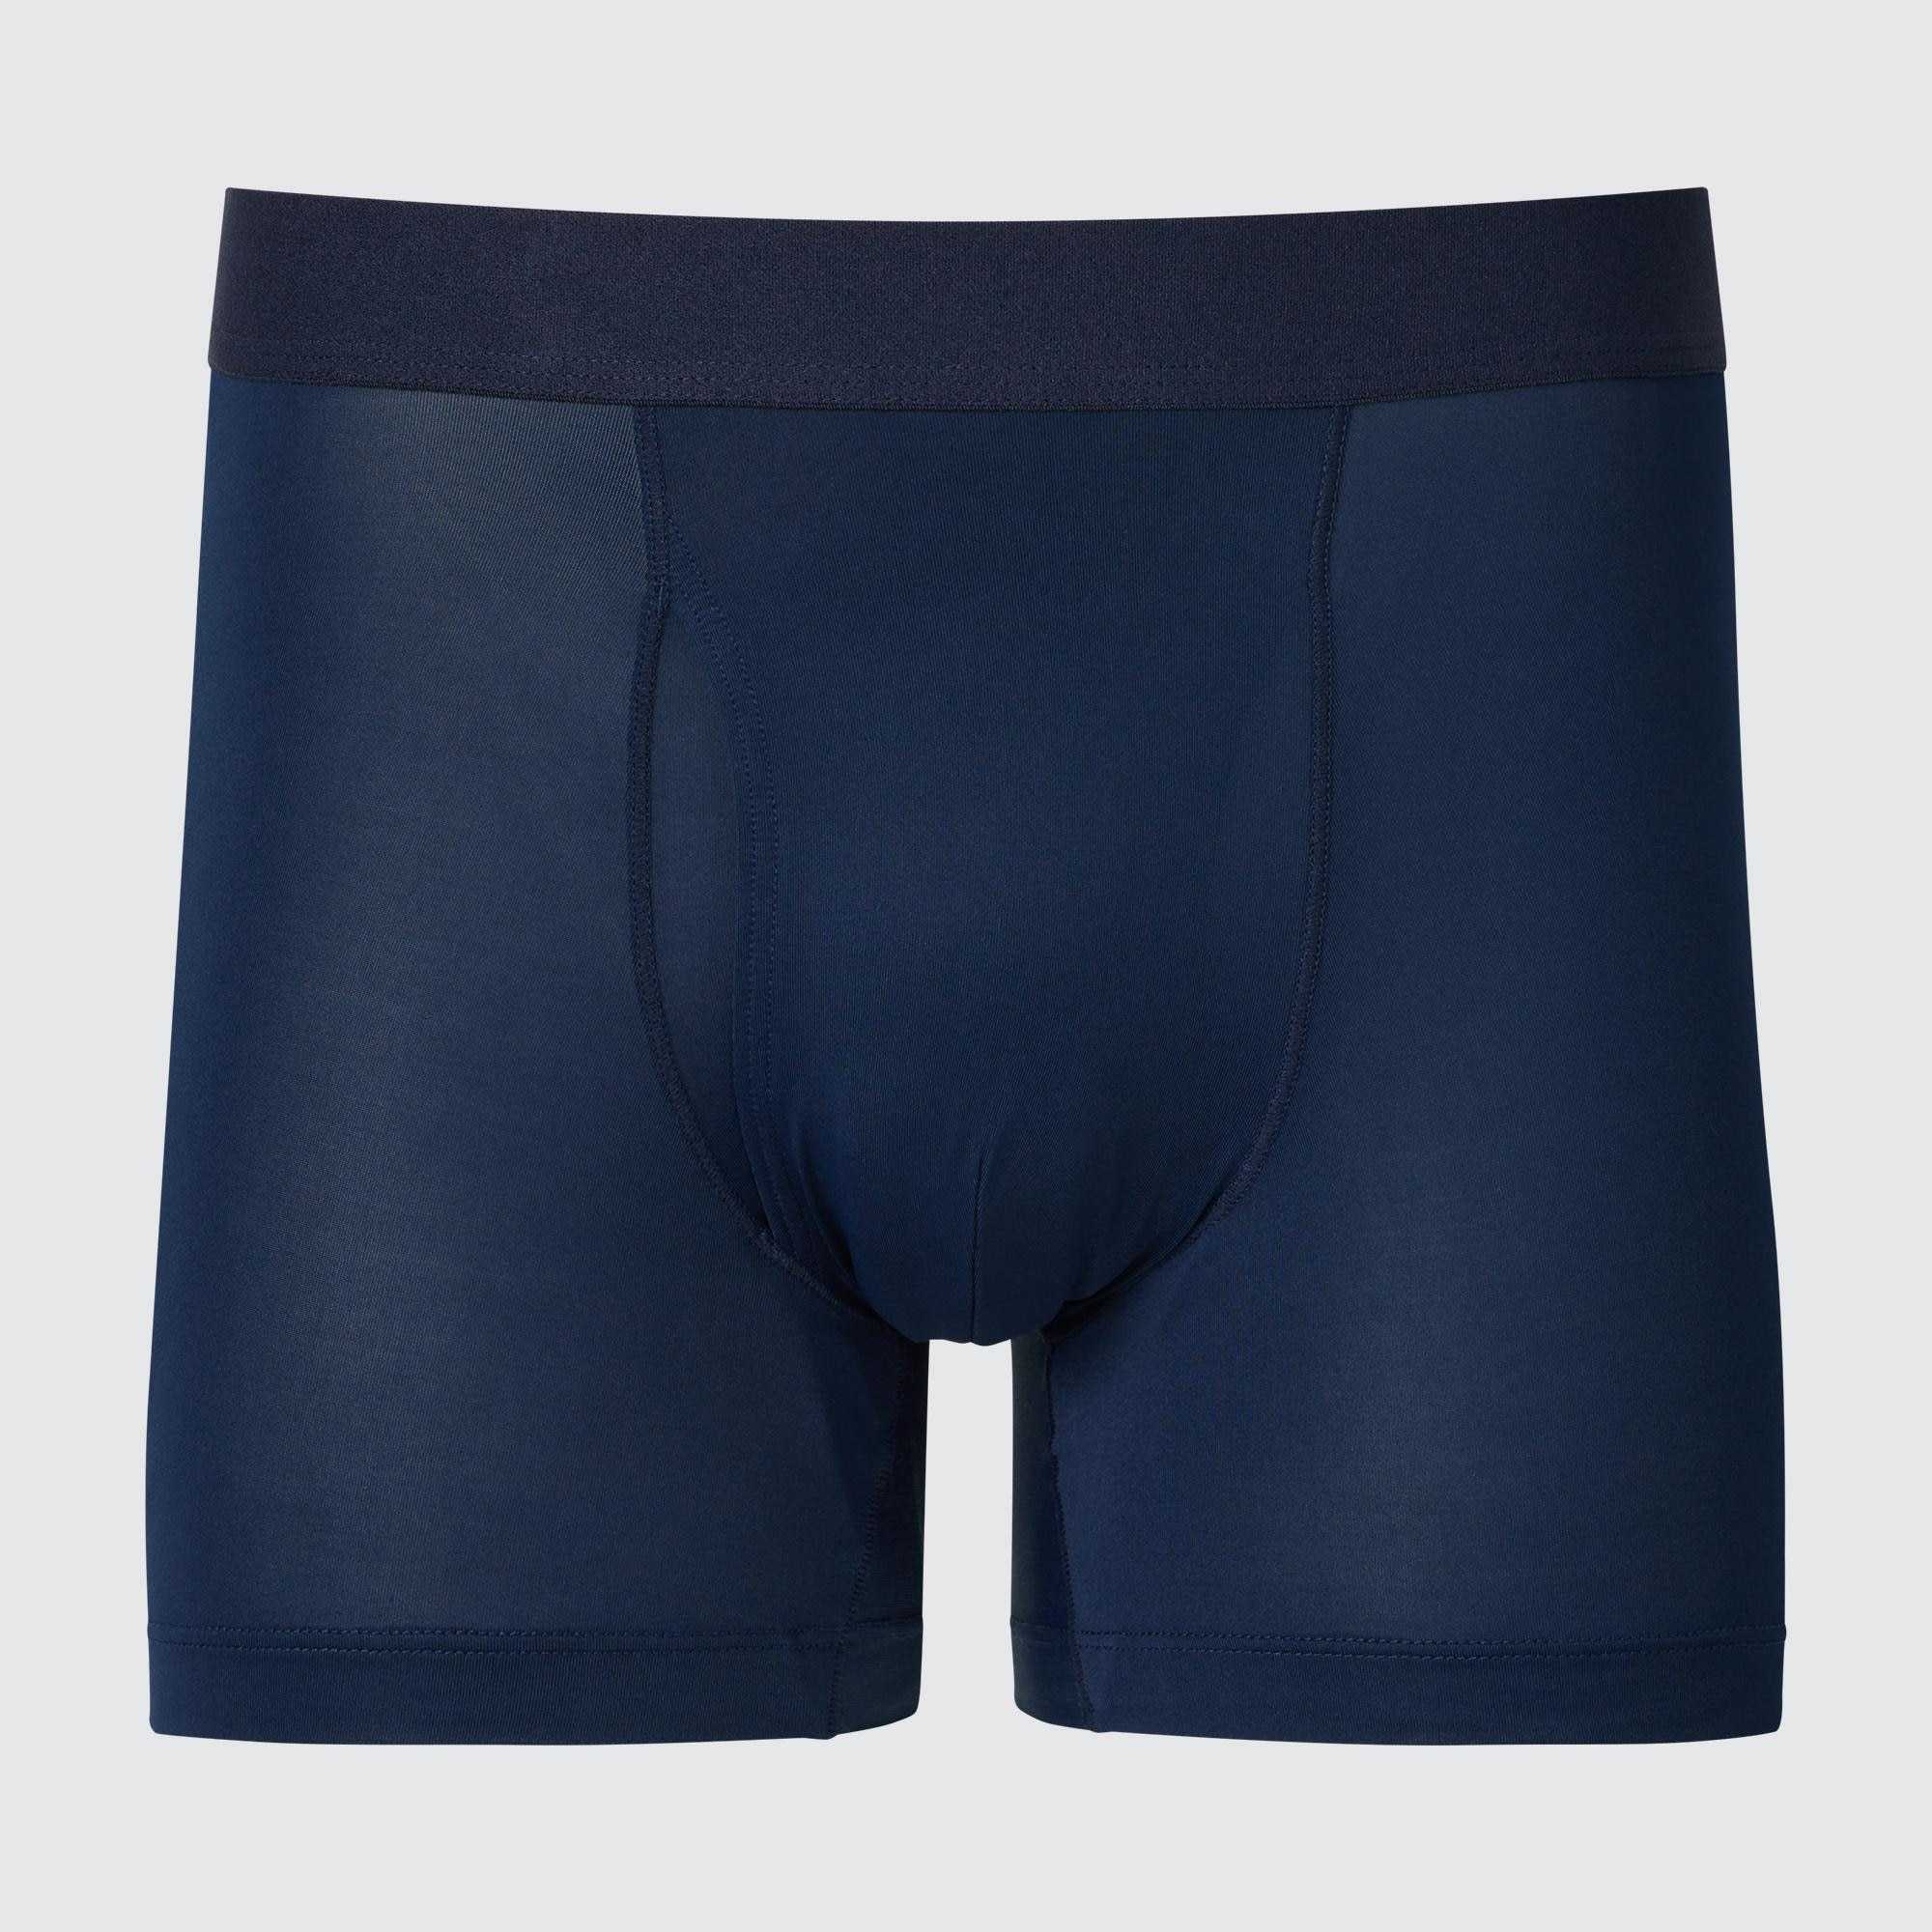 Best running underwear for men - Check out our tips here